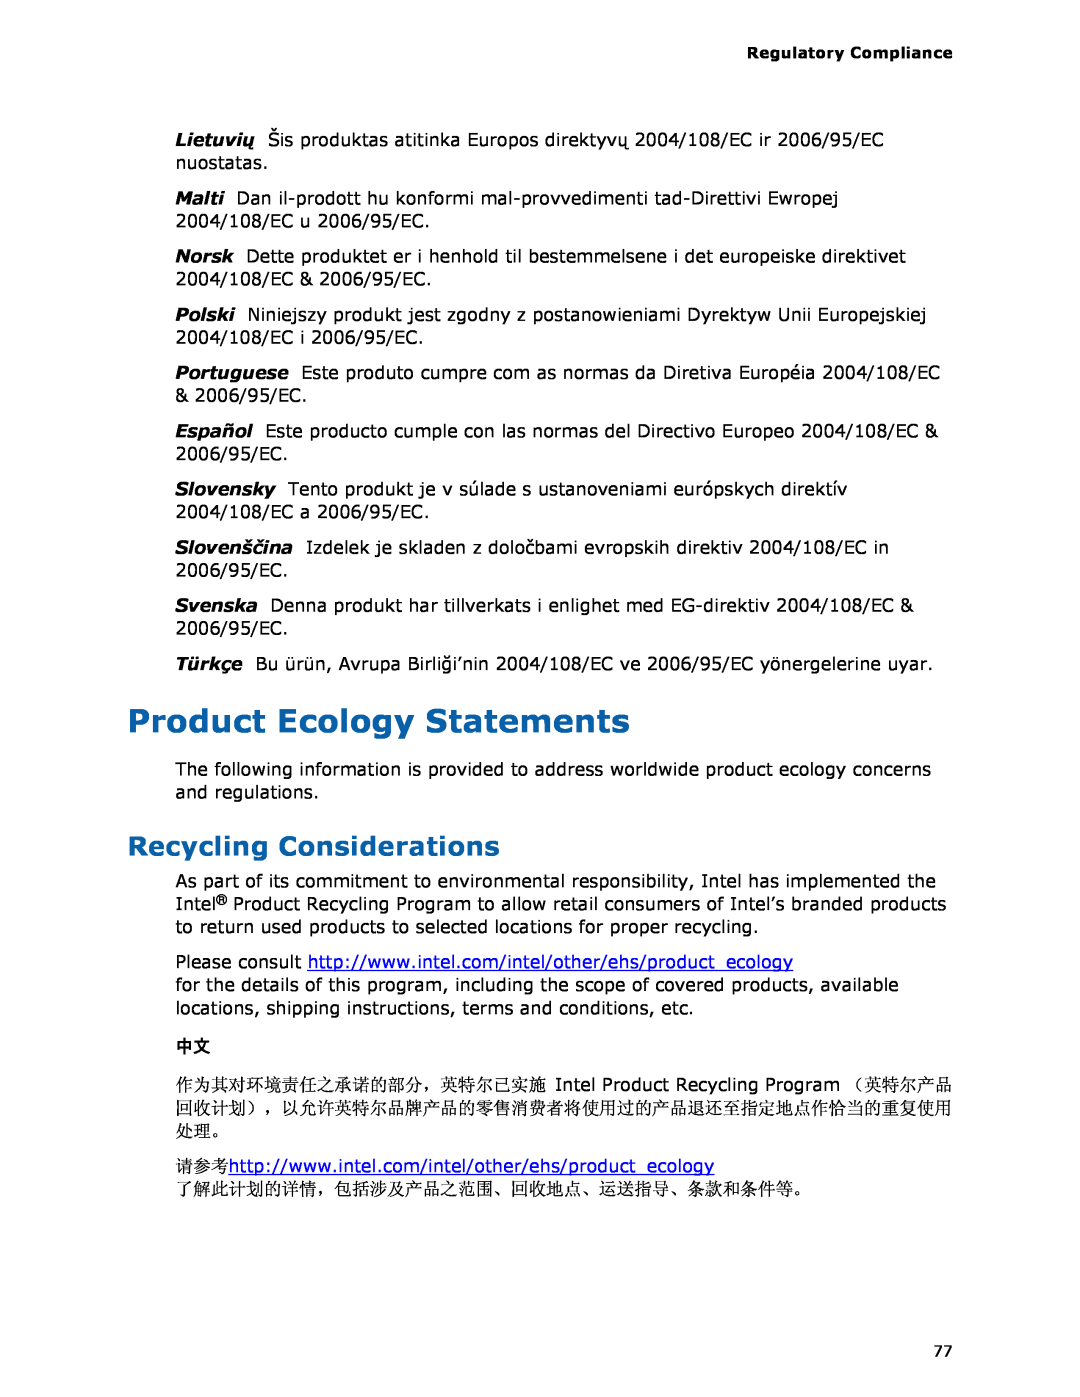 Intel DQ57TM manual Product Ecology Statements, Recycling Considerations 